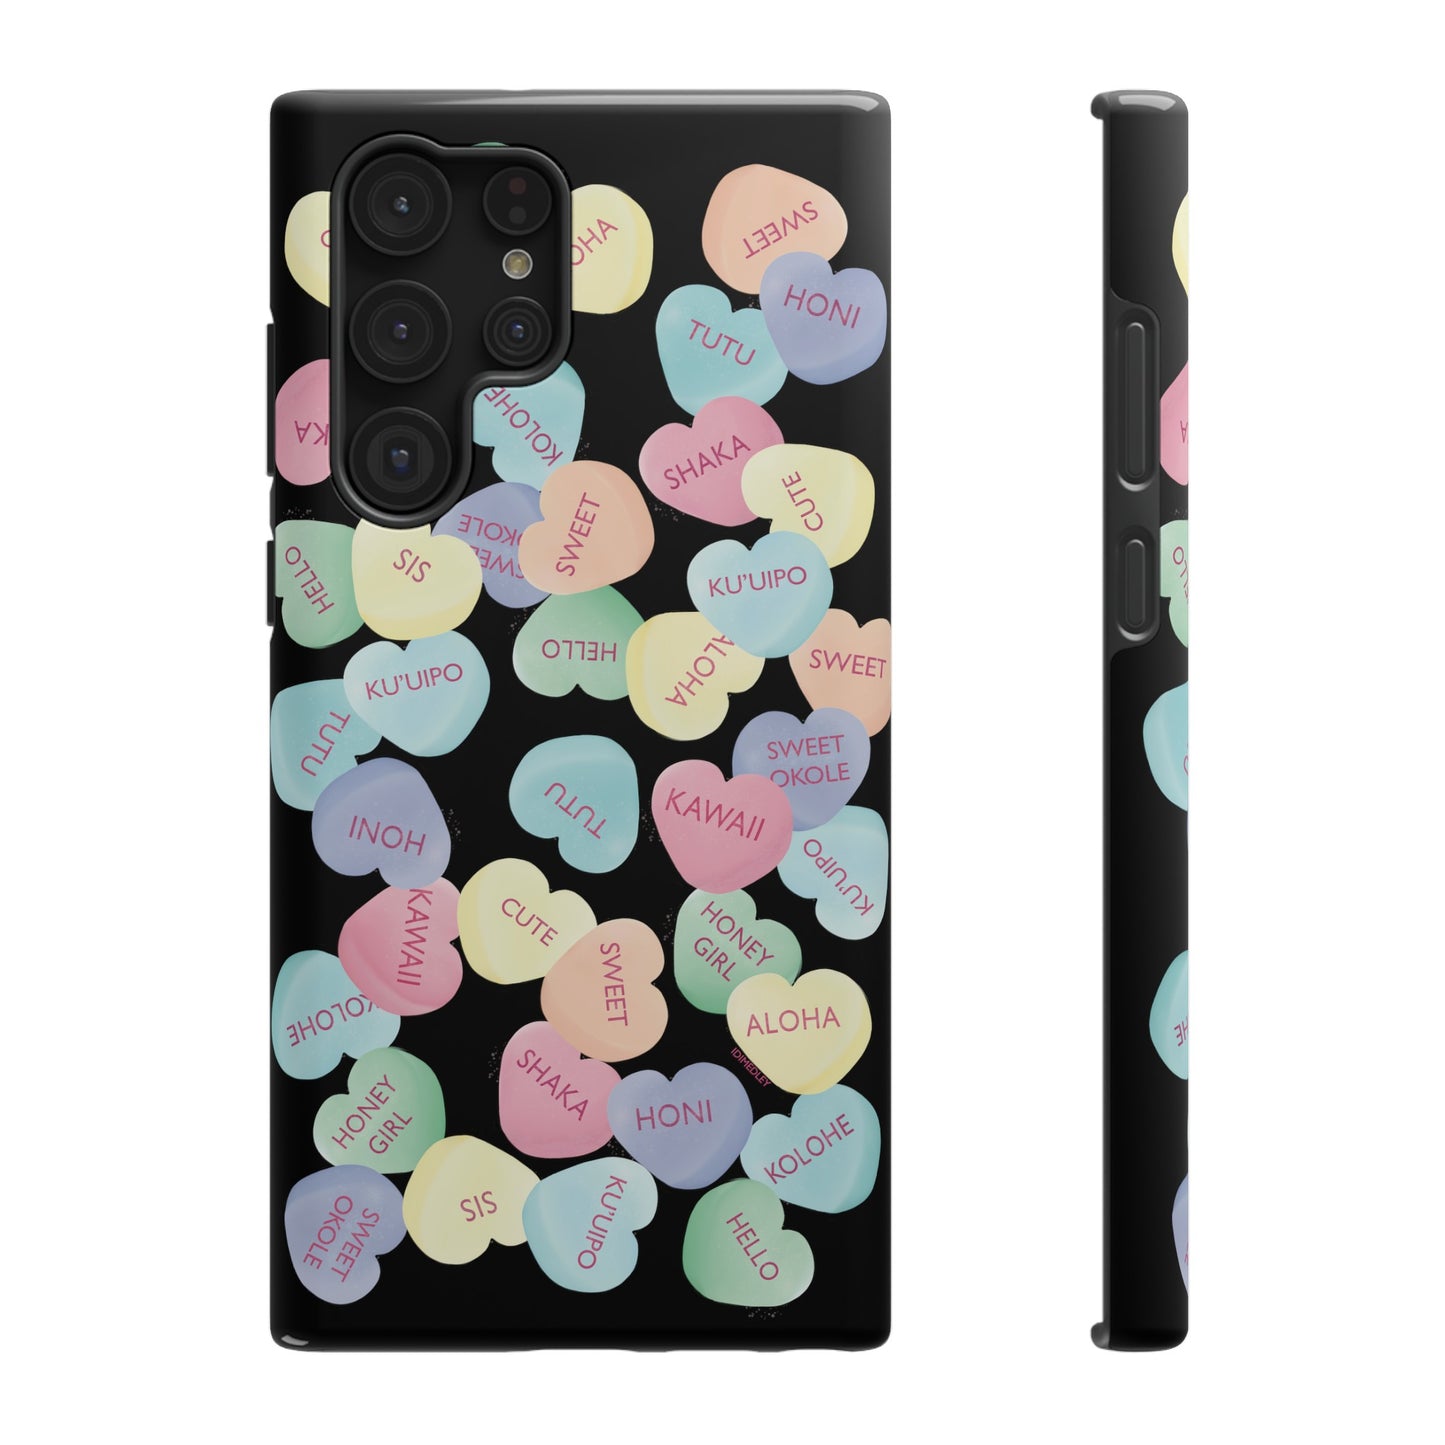 Candy Conversation Hearts Hawaii Style (Black)